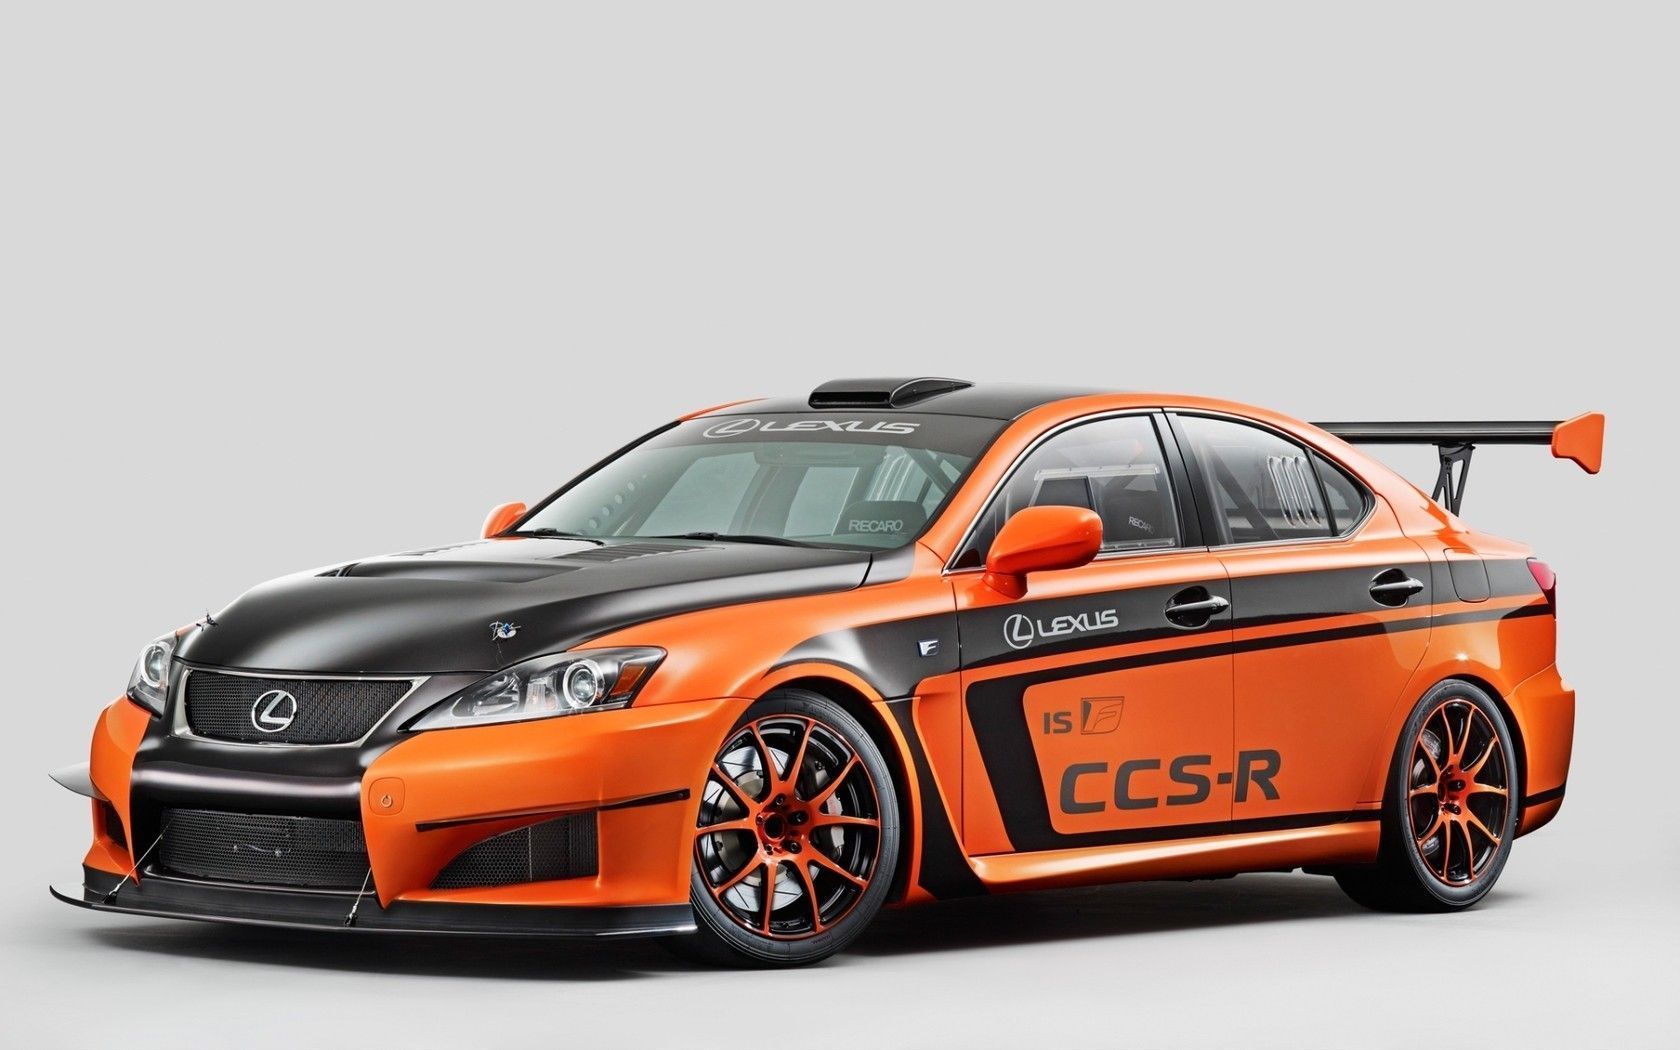 40 Cars Hd Wallpapers Pack Lexus Tuning Car Awesome Hd Wallpaper ...